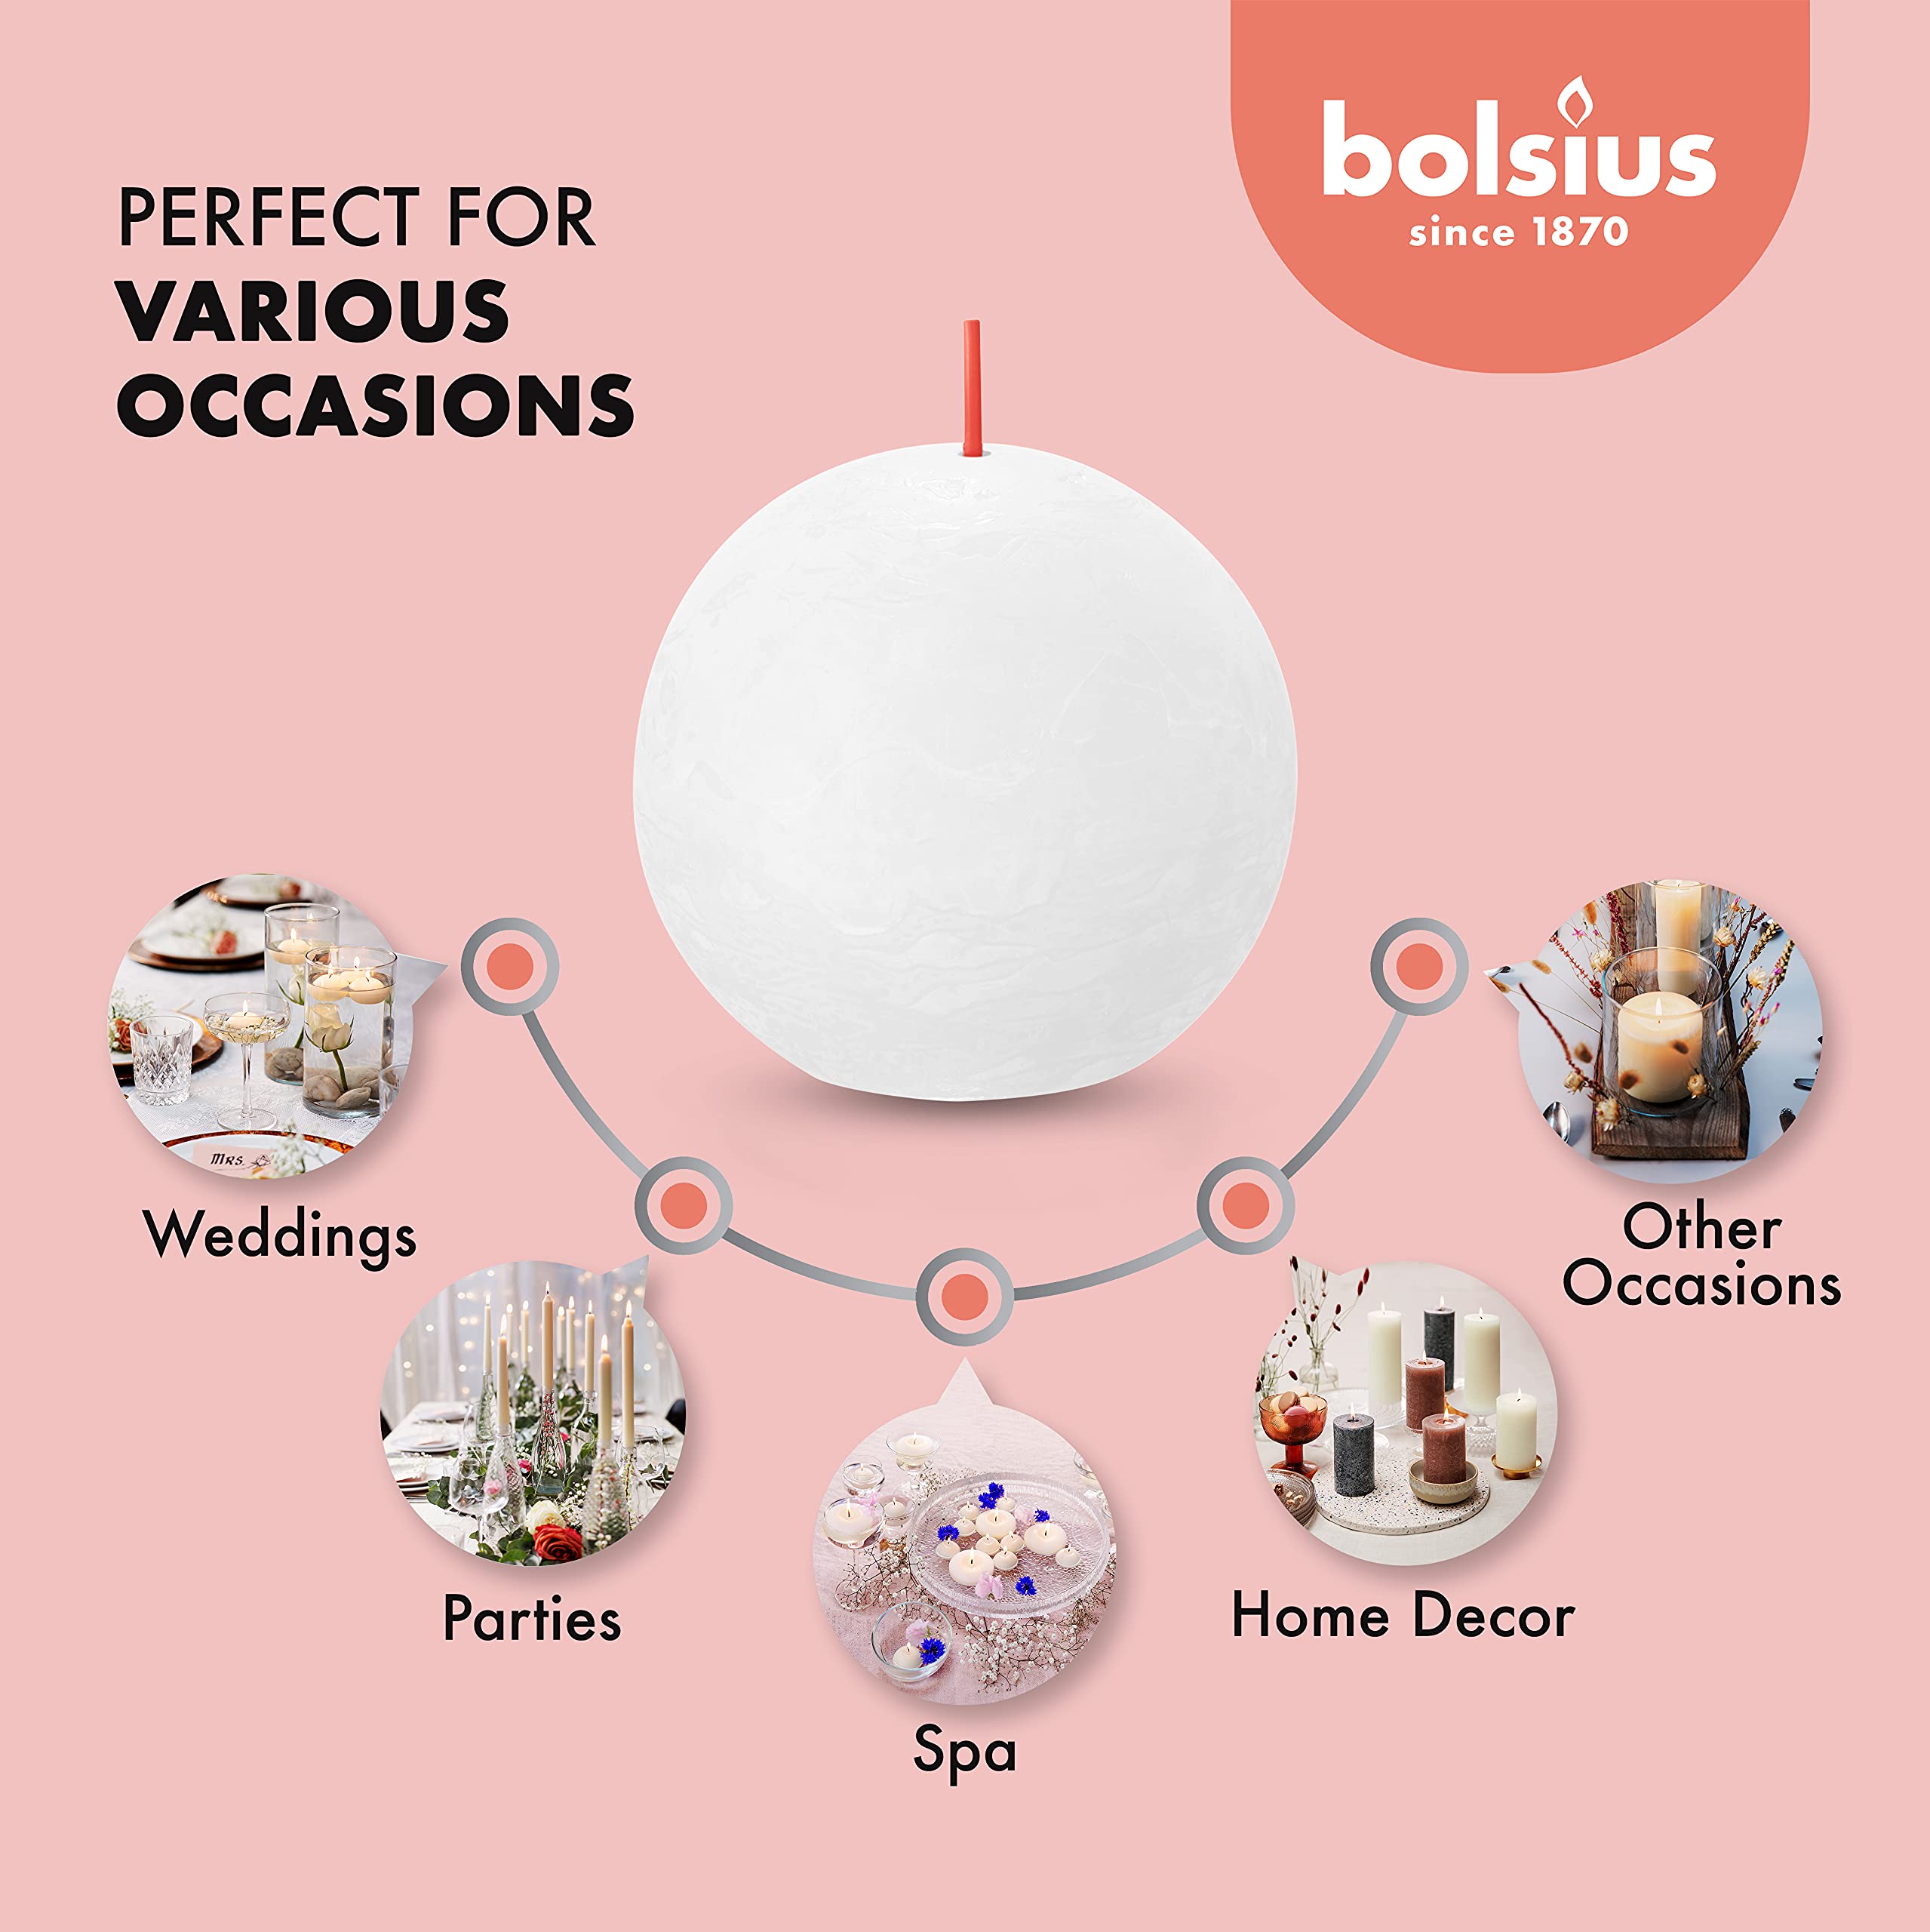 BOLSIUS 3 Pack Pillar Candles - 3 Inch - Premium European Quality - Natural Eco-Friendly Plant-Based Wax - Unscented Dripless Smokeless 25 Hour Party Décor and Wedding Candles  - Like New